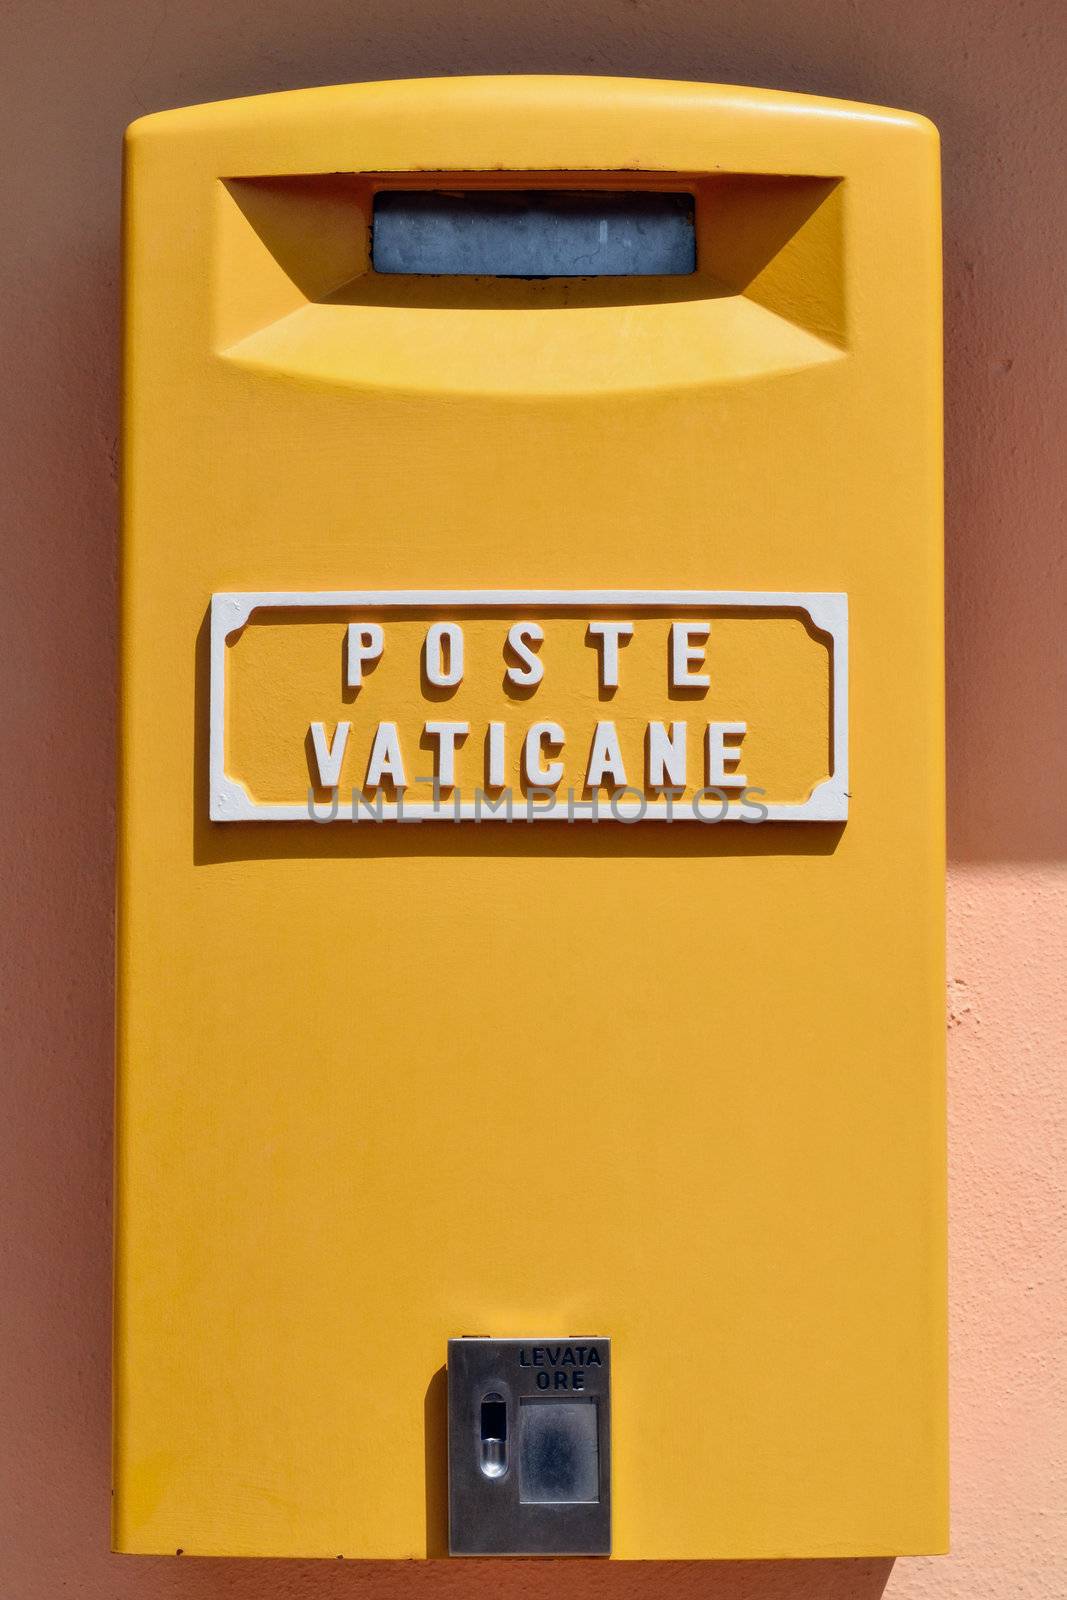 Yellow Box of Post Office in Vatican. Rome